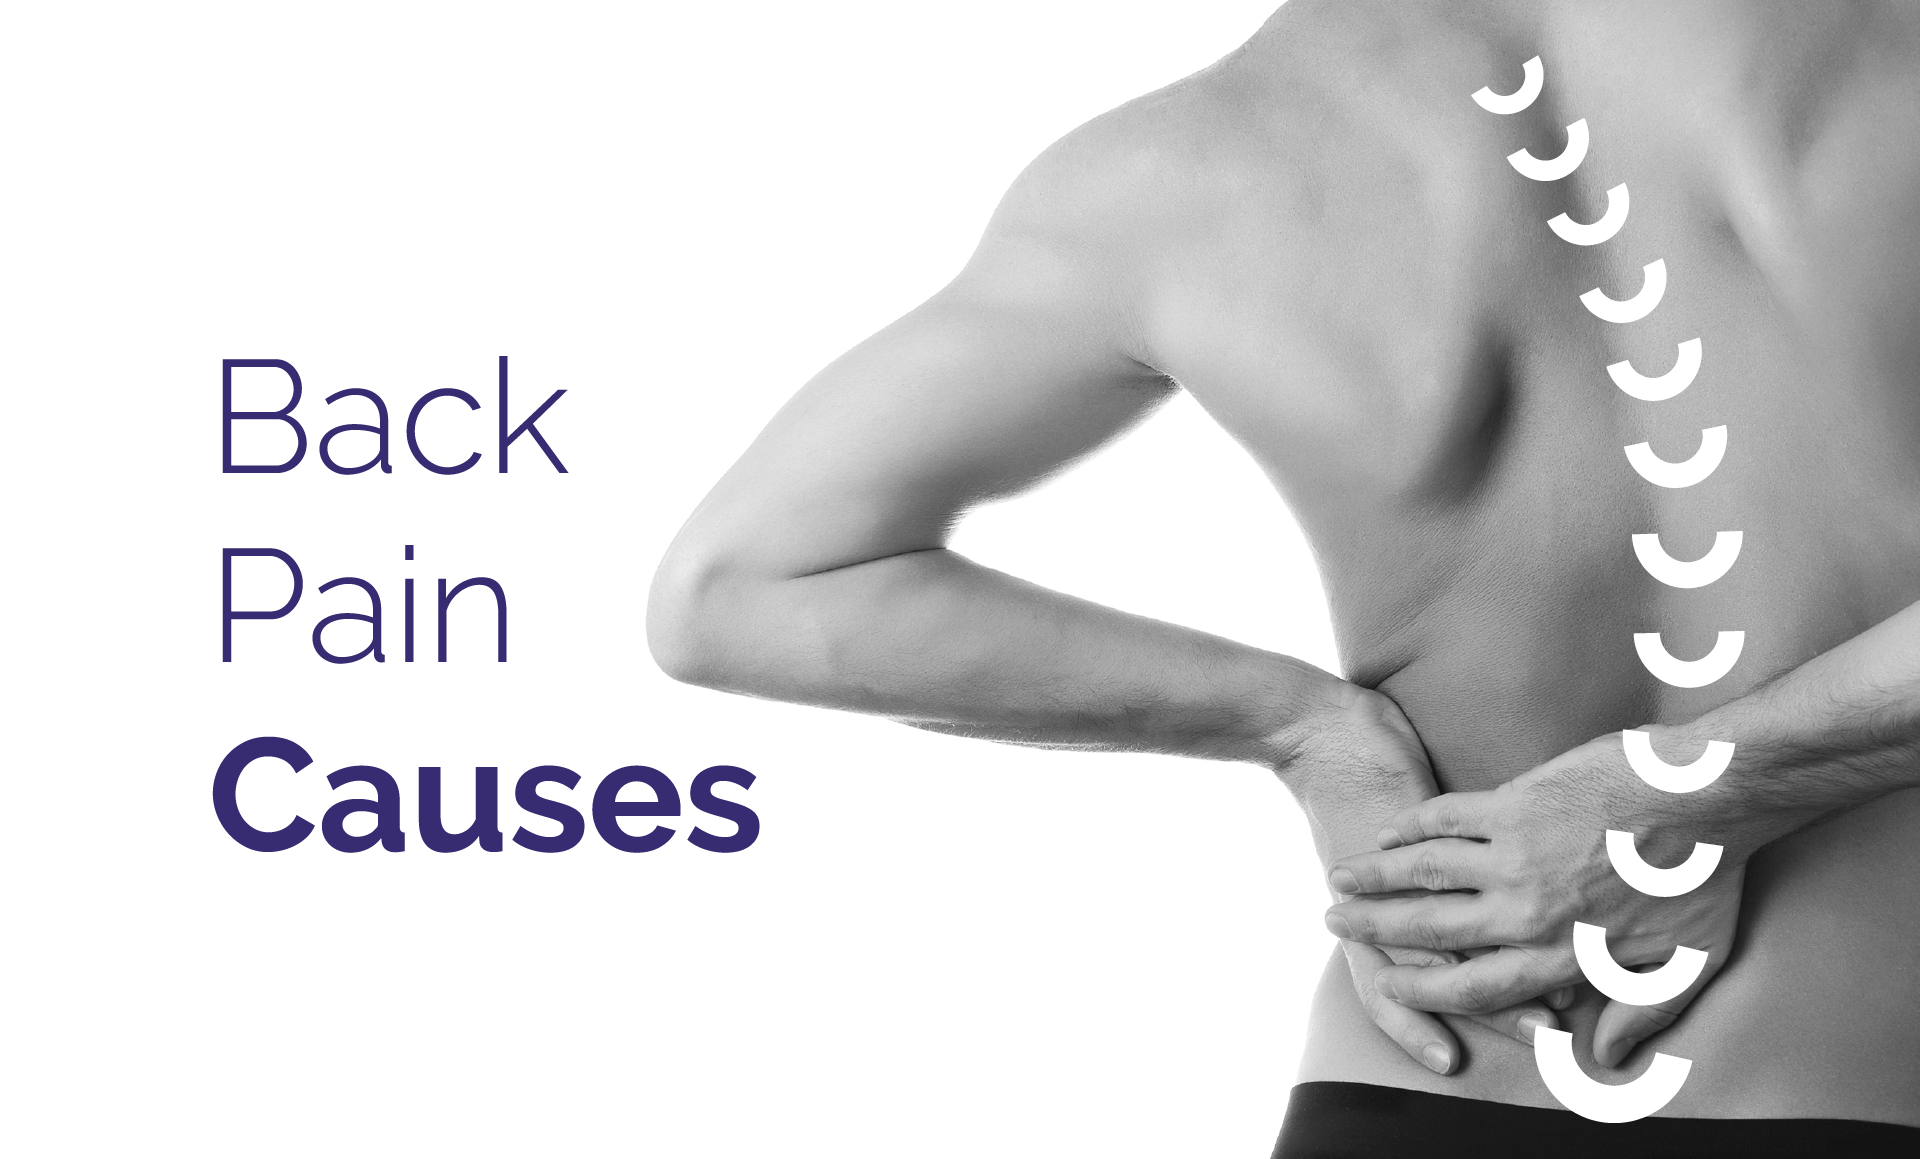 When Should I Be Worried about Lower Back Pain? Causes, Treatments